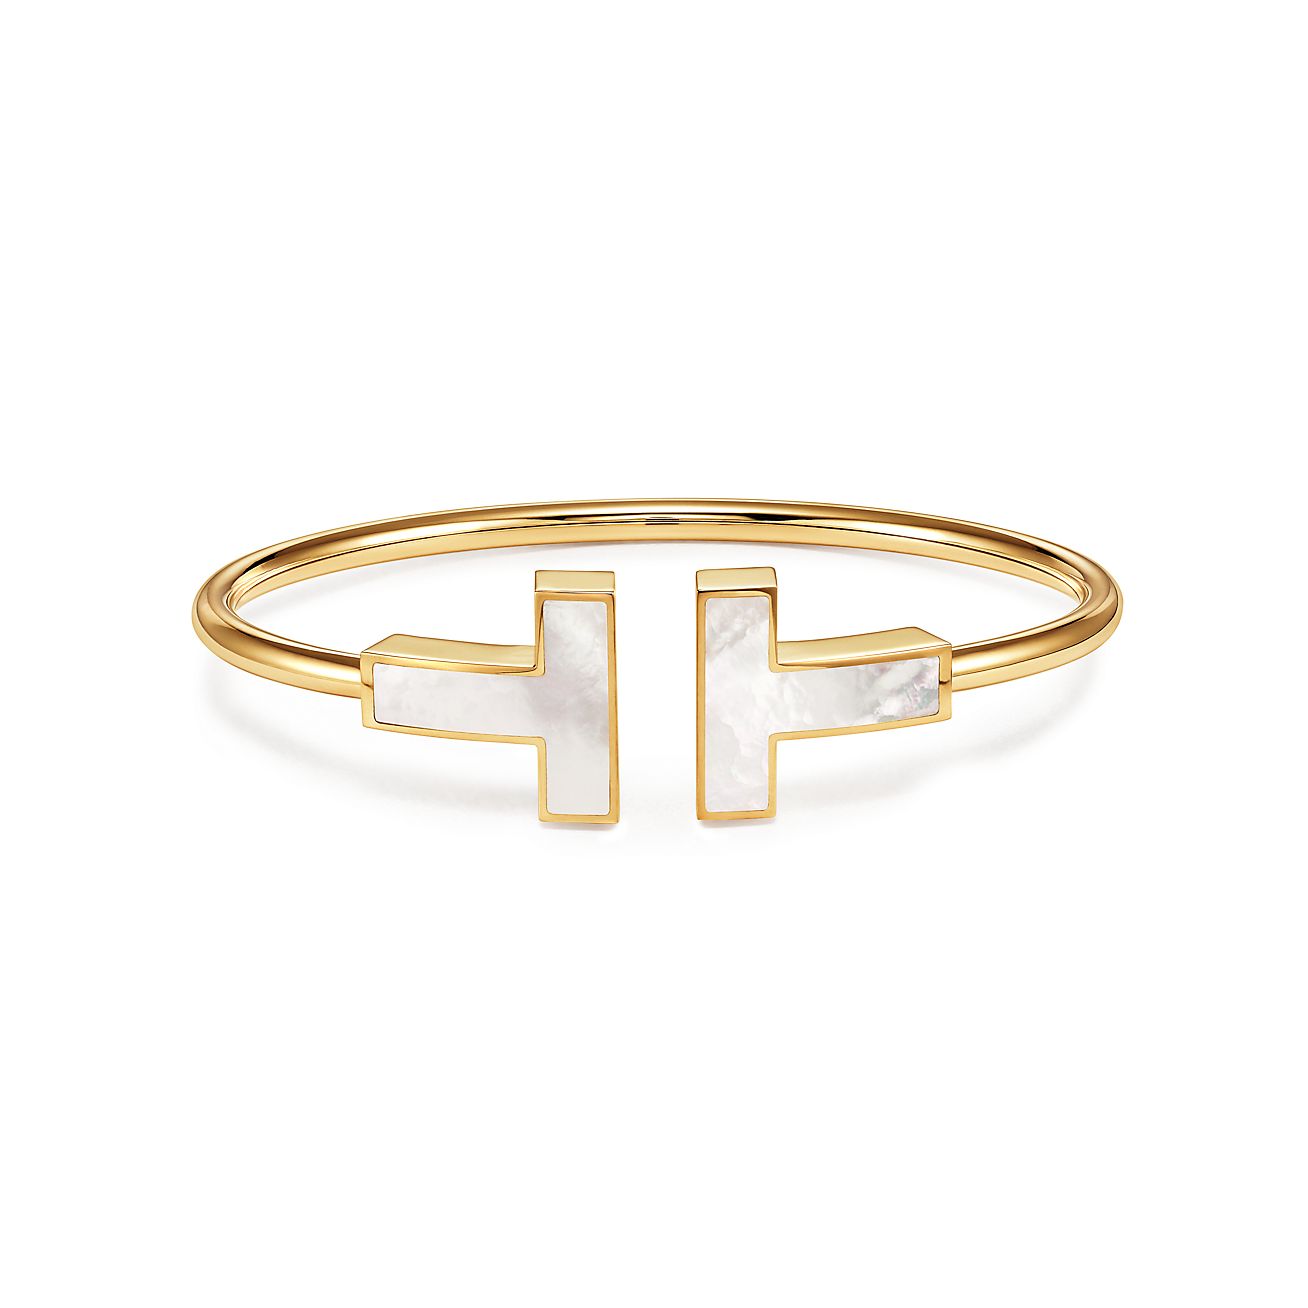 Tiffany T wide mother-of-pearl wire bracelet in 18k gold, small ...